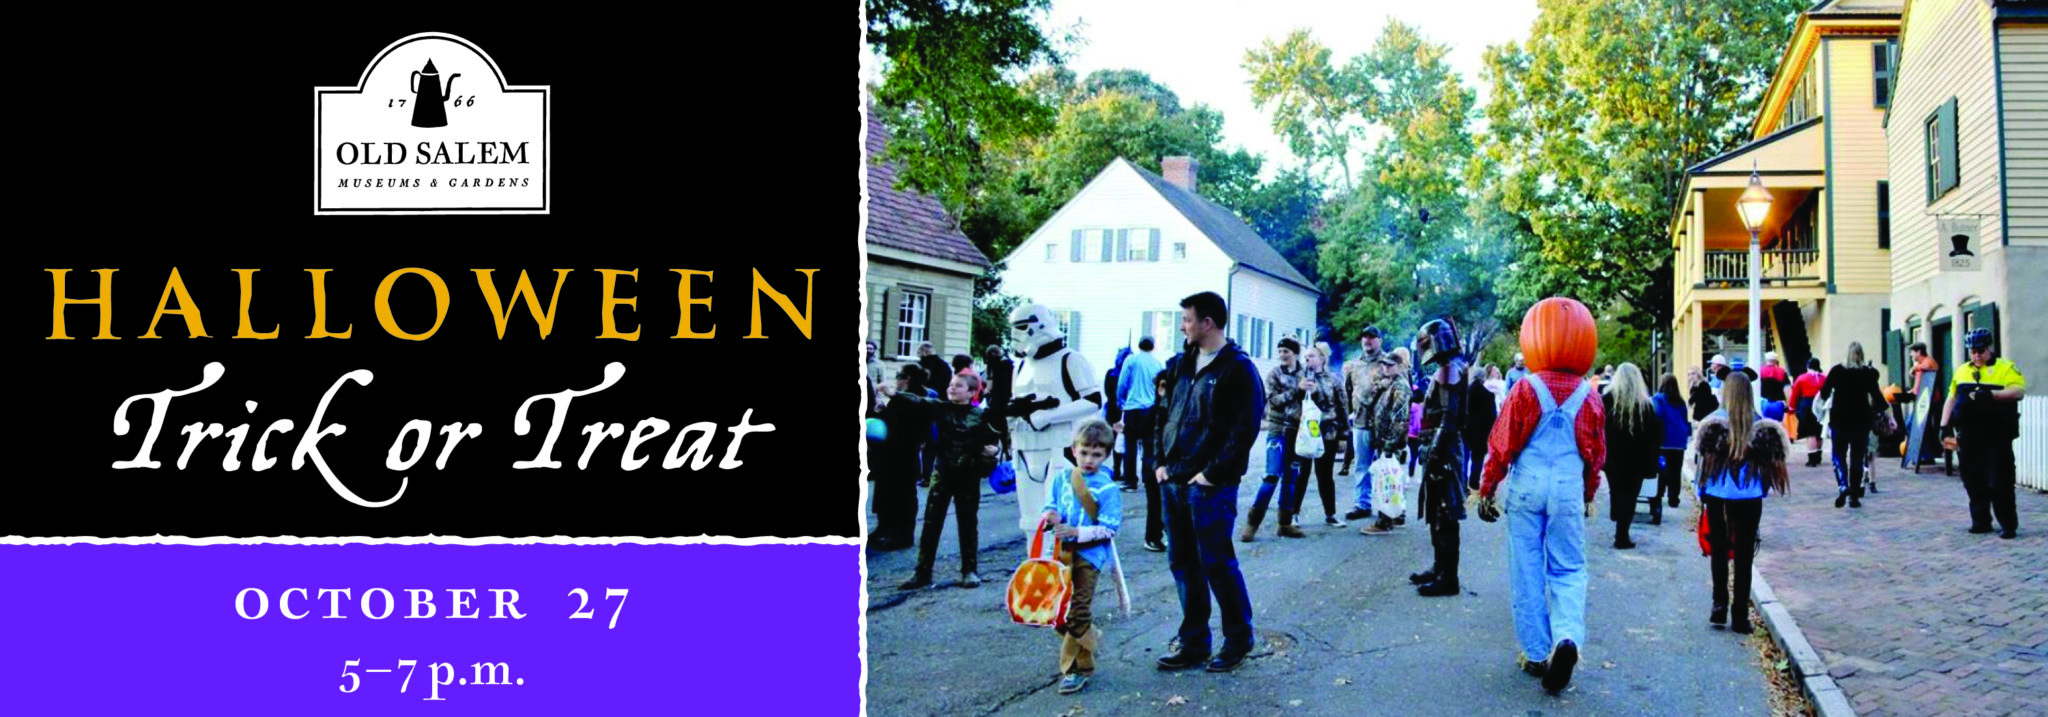 Halloween Trick or Treating 2019 Old Salem Museums & Gardens